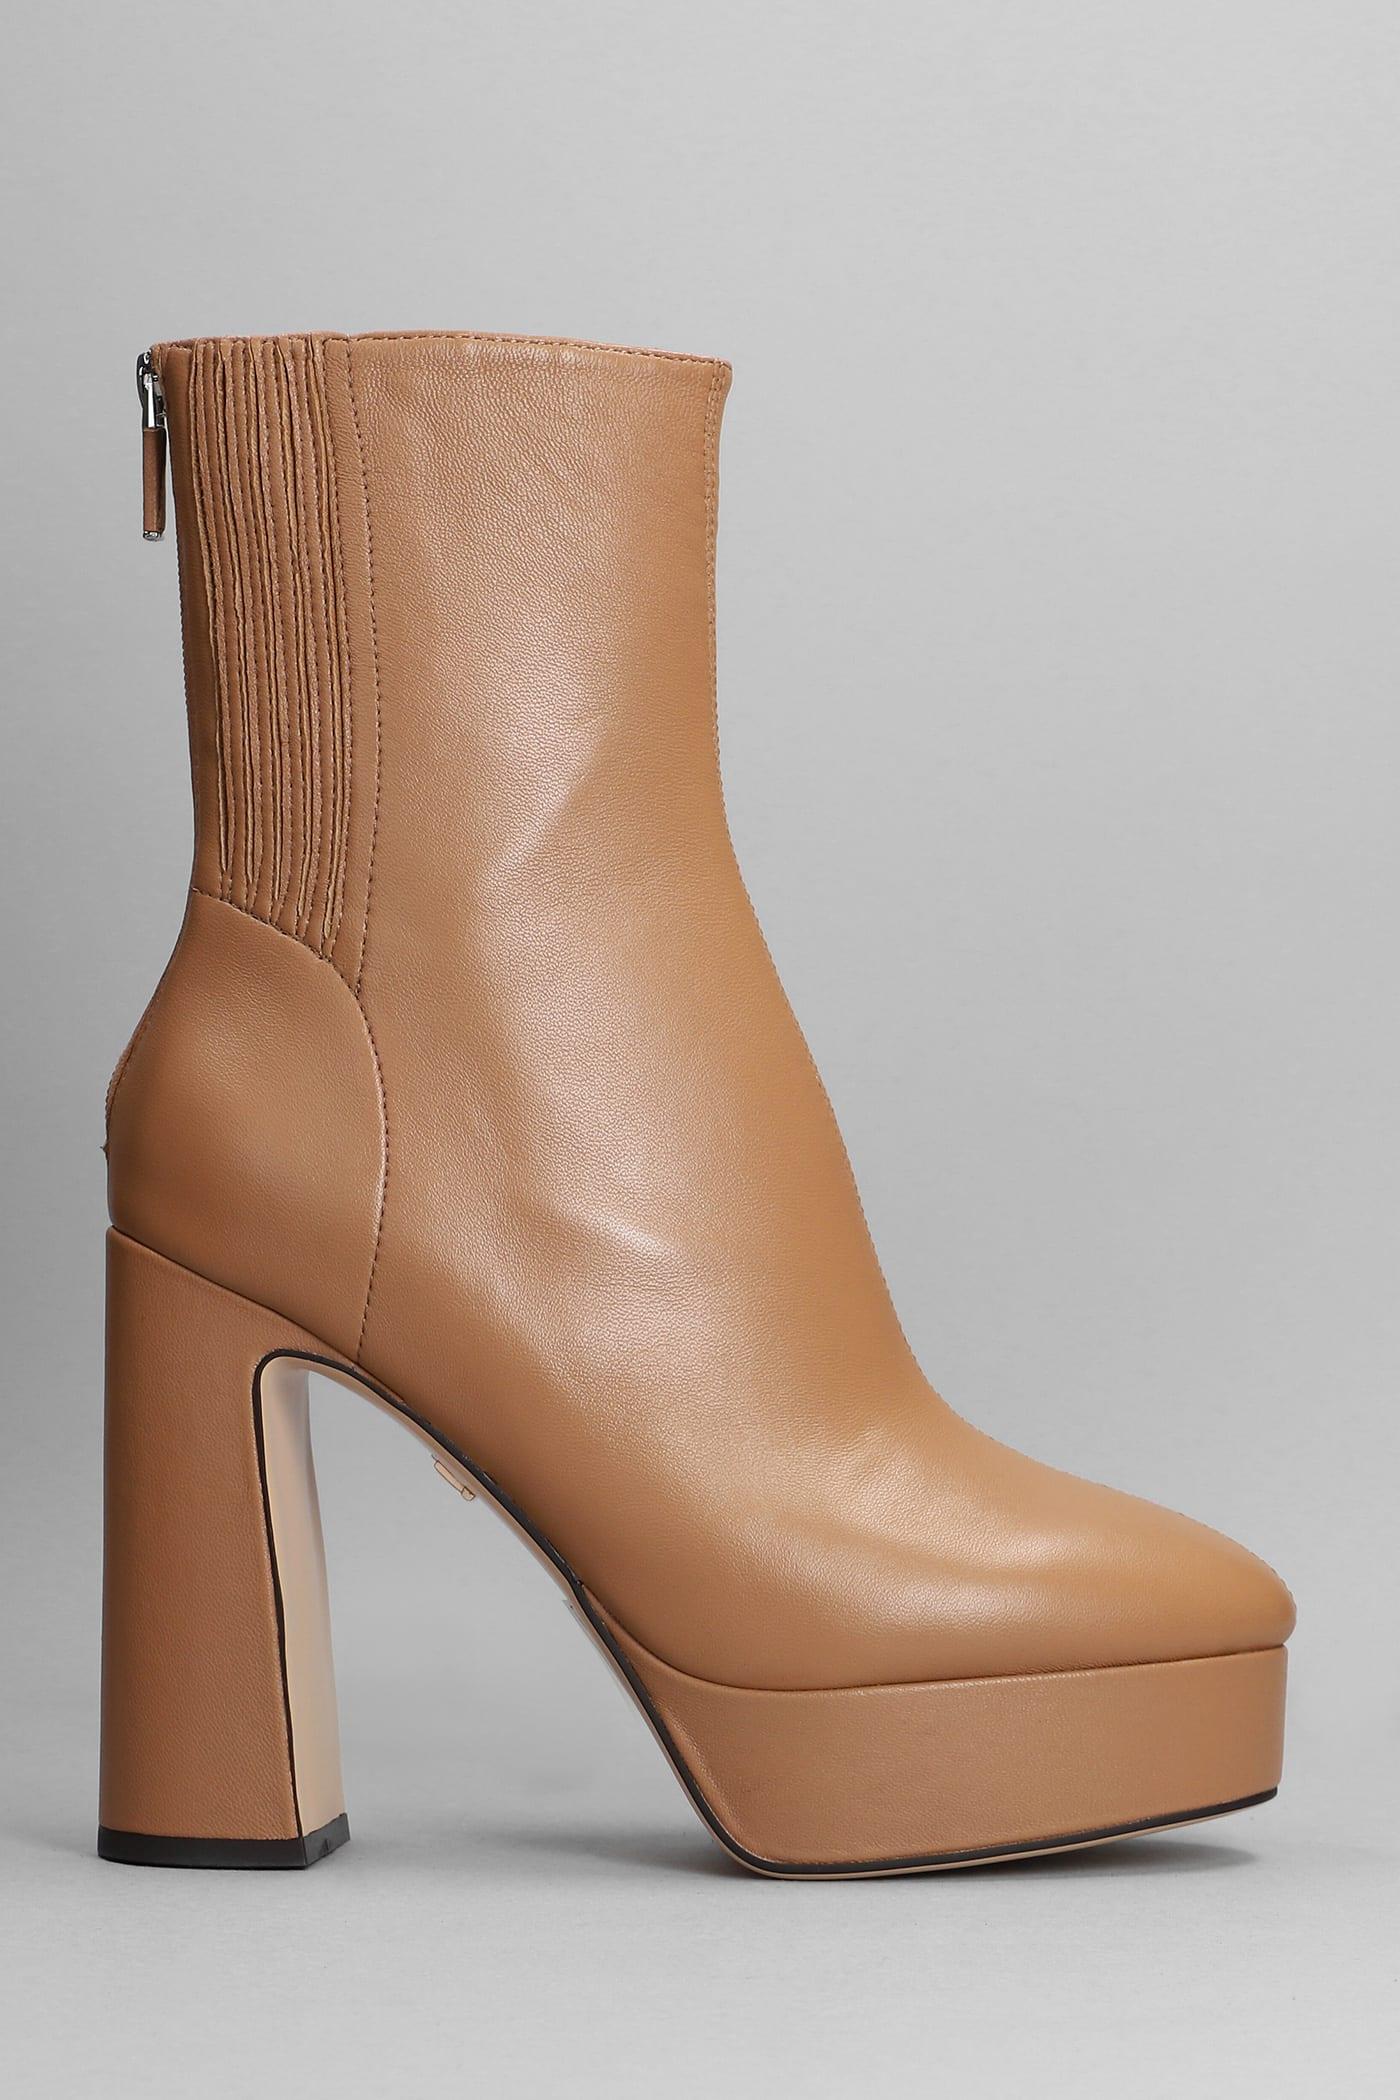 Lola Cruz High Heels Ankle Boots In Camel Leather in Brown | Lyst